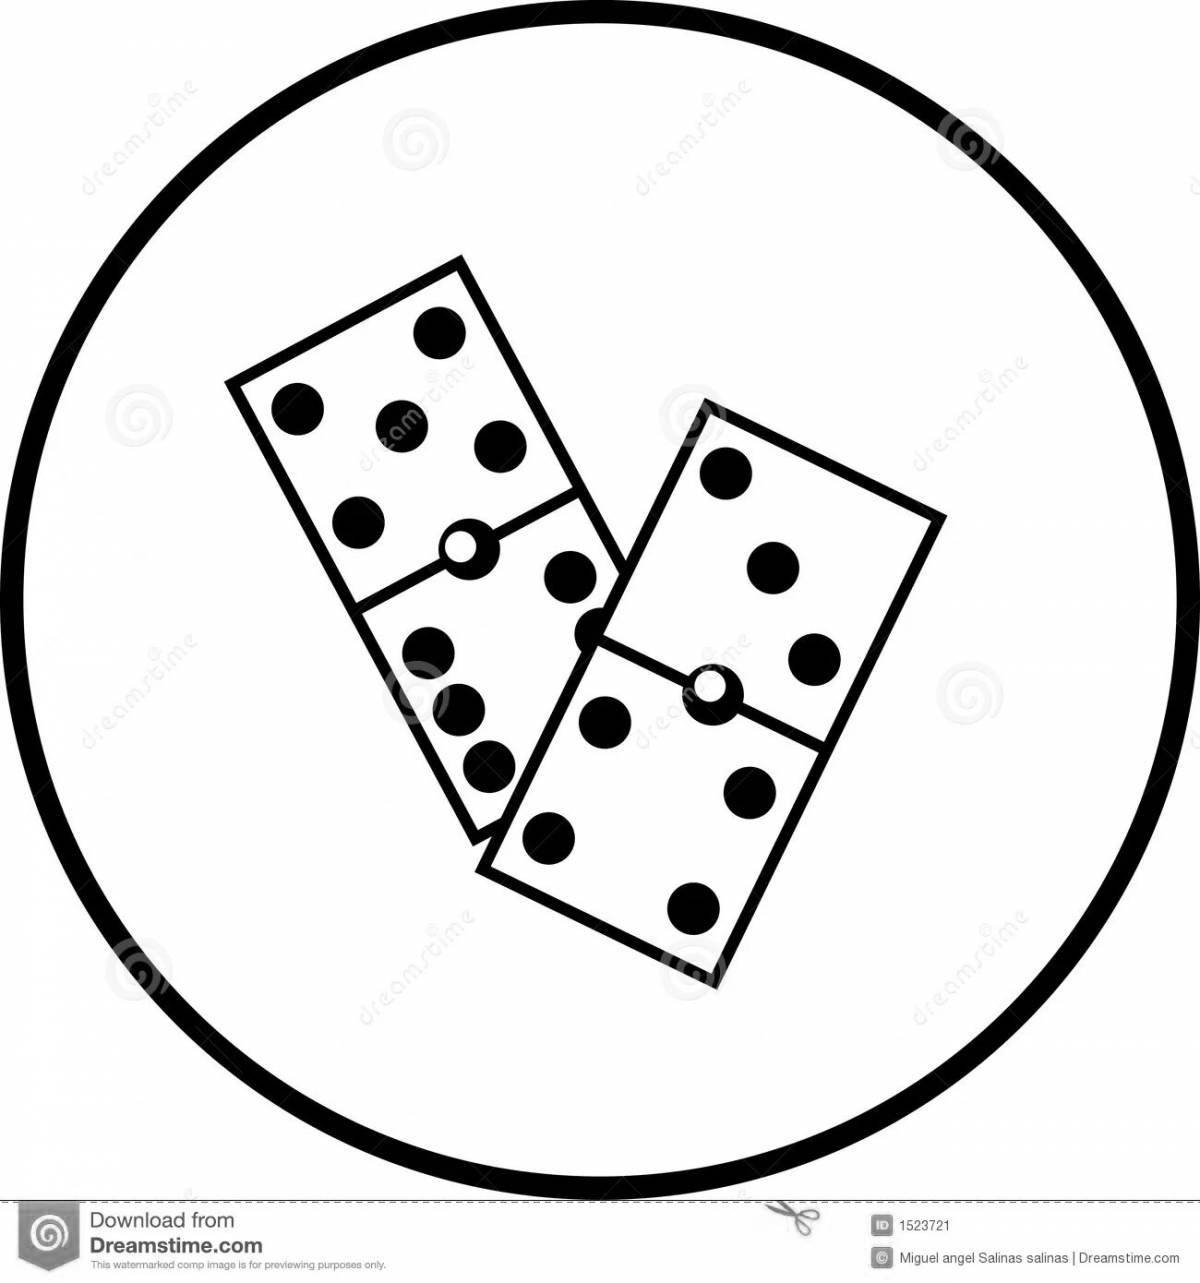 Funny domino coloring pages for kids